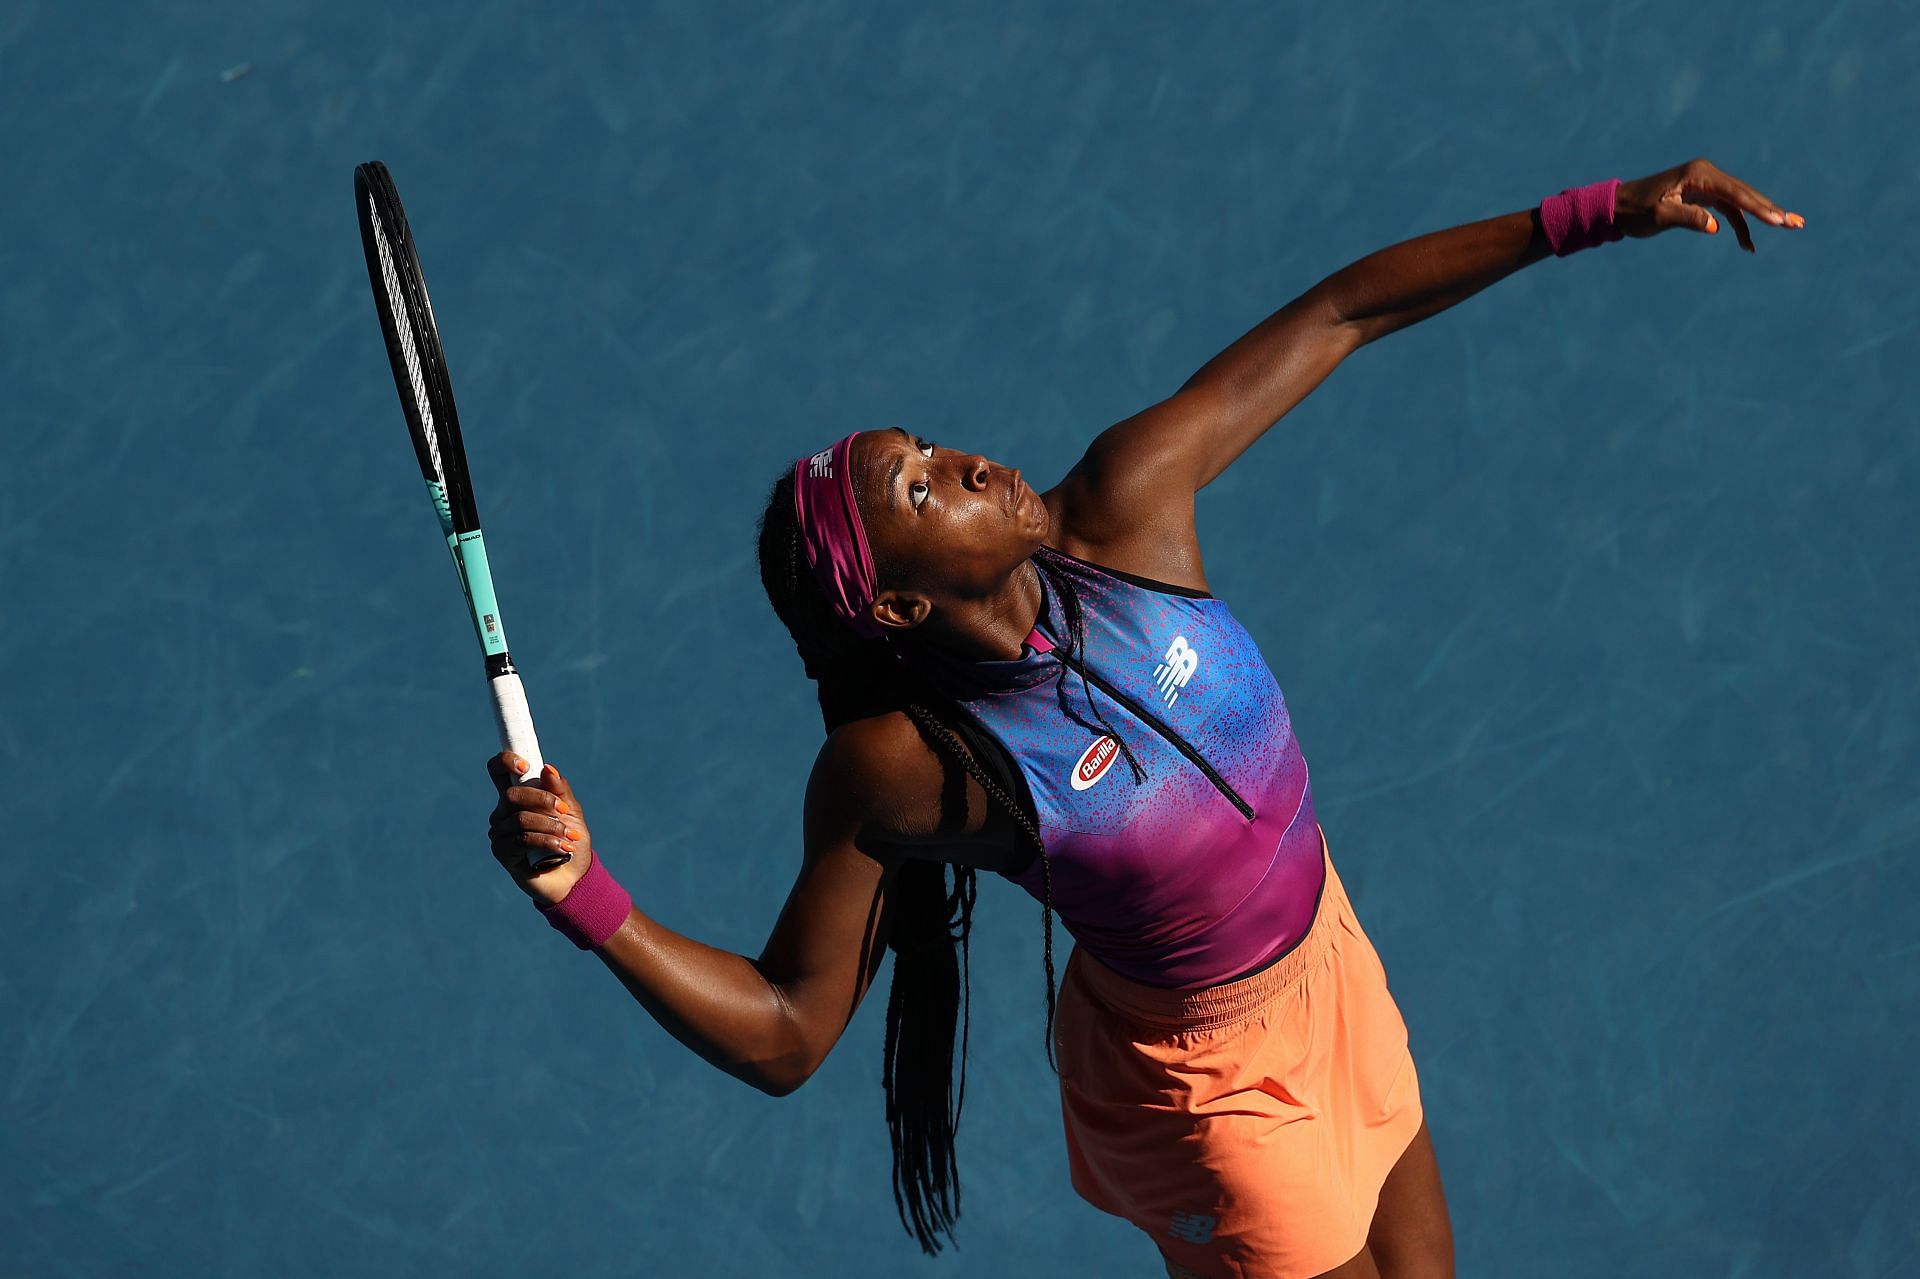 Coco Gauff lost her opener against Qiang Wang at the 2022 Australian Open